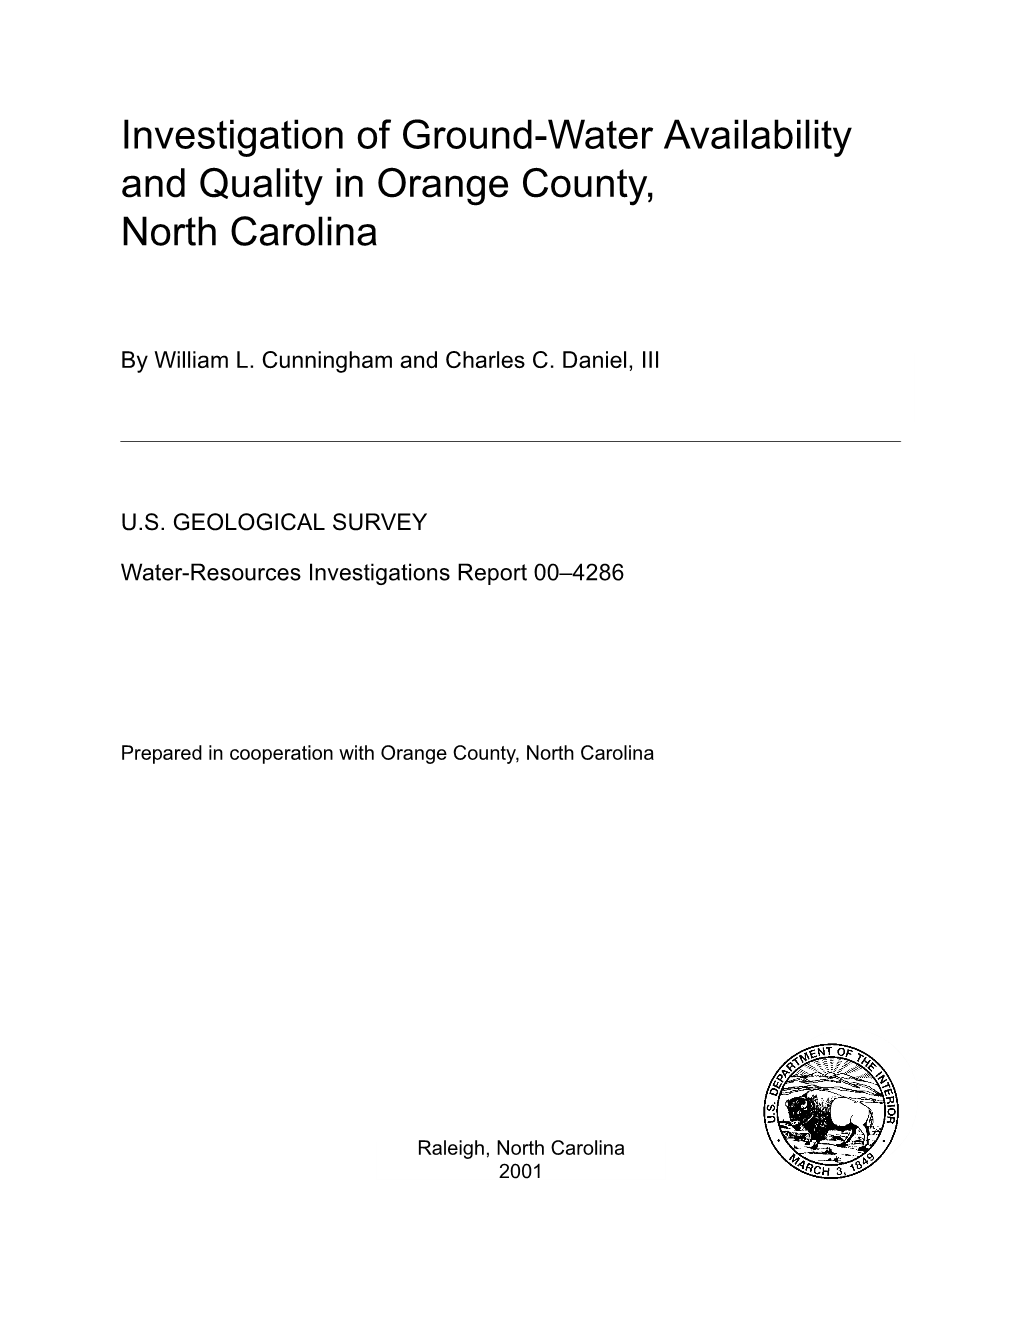 Investigation of Ground-Water Availability and Quality in Orange County, North Carolina